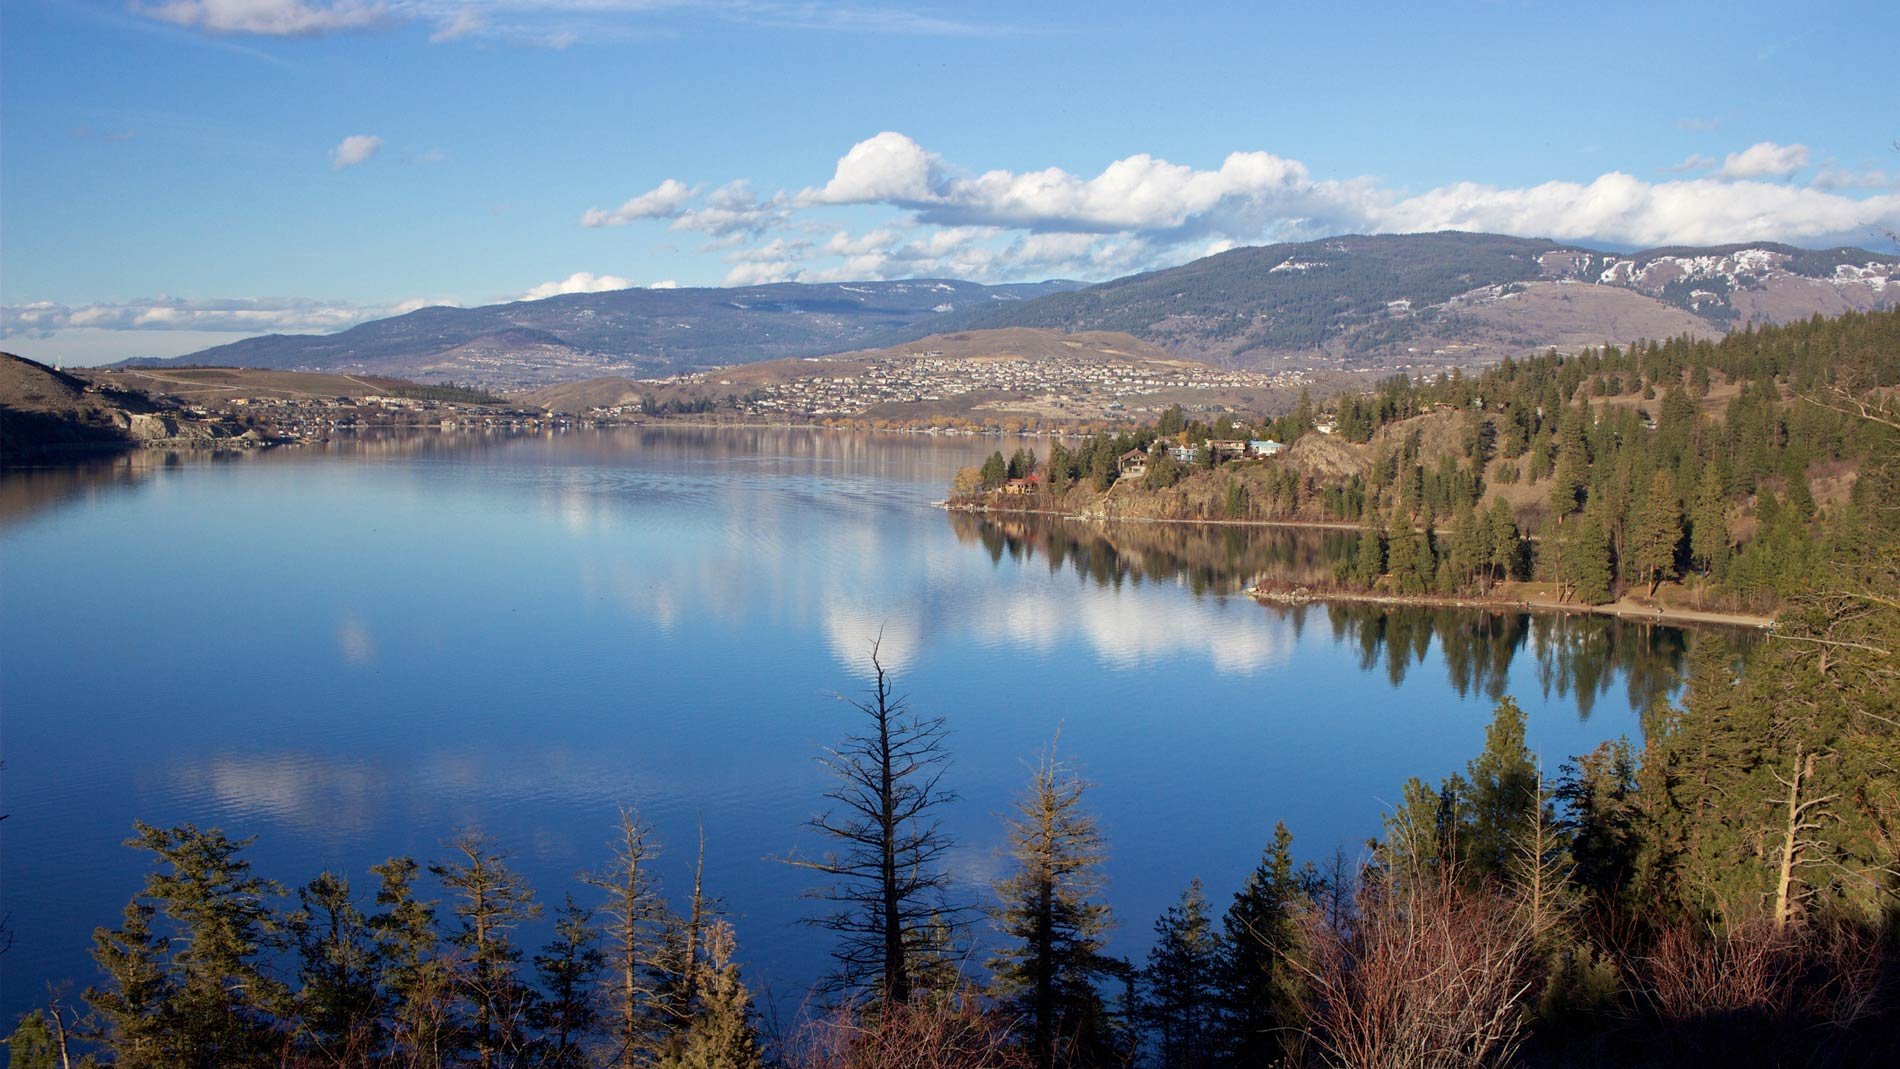 A view of a calm lake during the daytime in the Okanagan Valley in Vernon, British Columbia